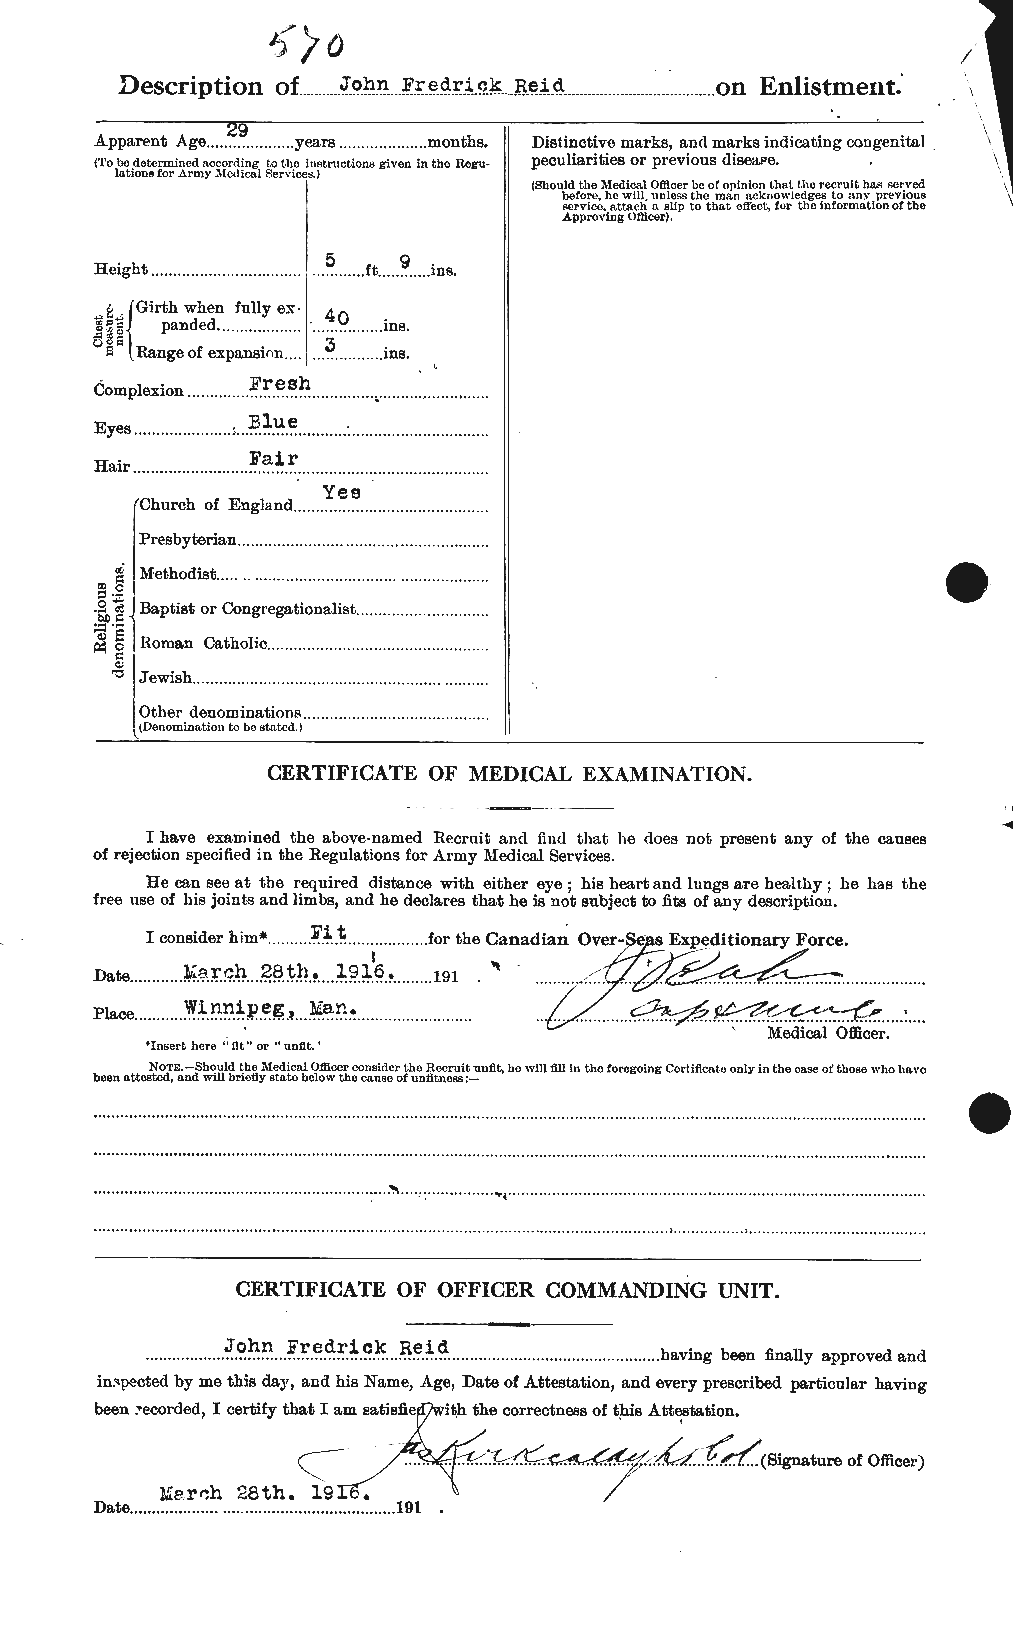 Personnel Records of the First World War - CEF 598838b